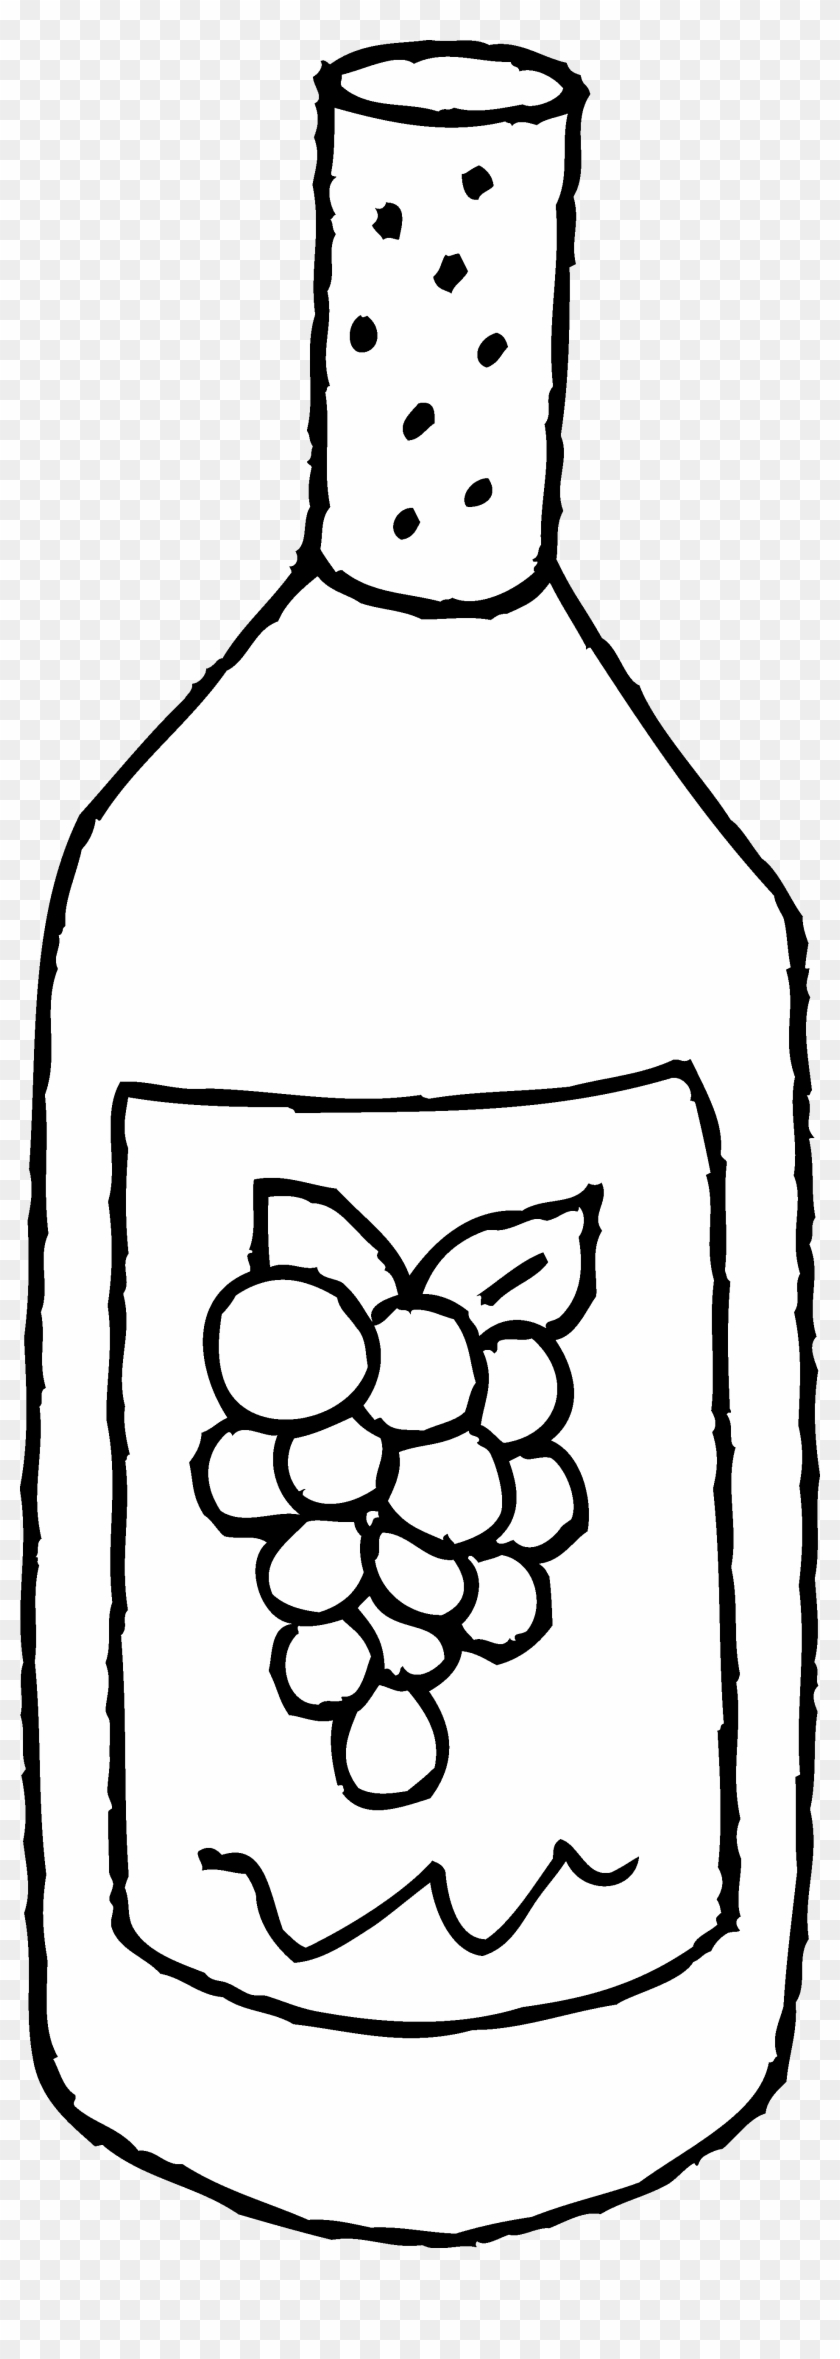 Bottle Clipart Colouring - Wine Bottle In Black And White #975984